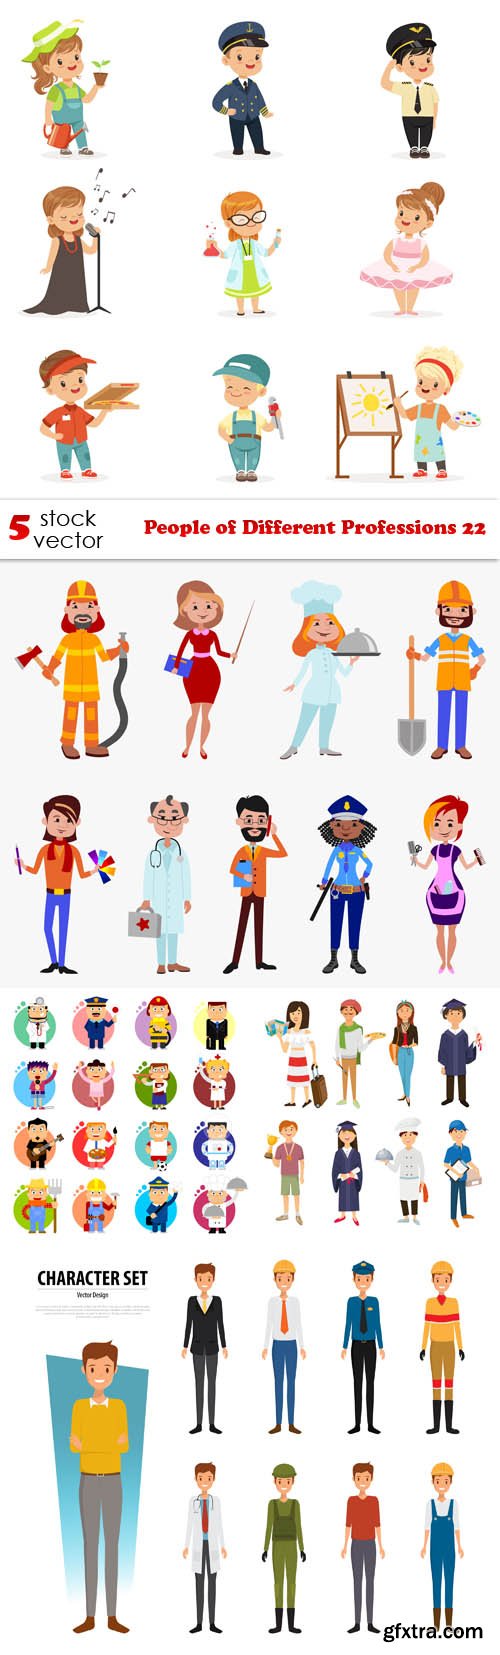 Vectors - People of Different Professions 22